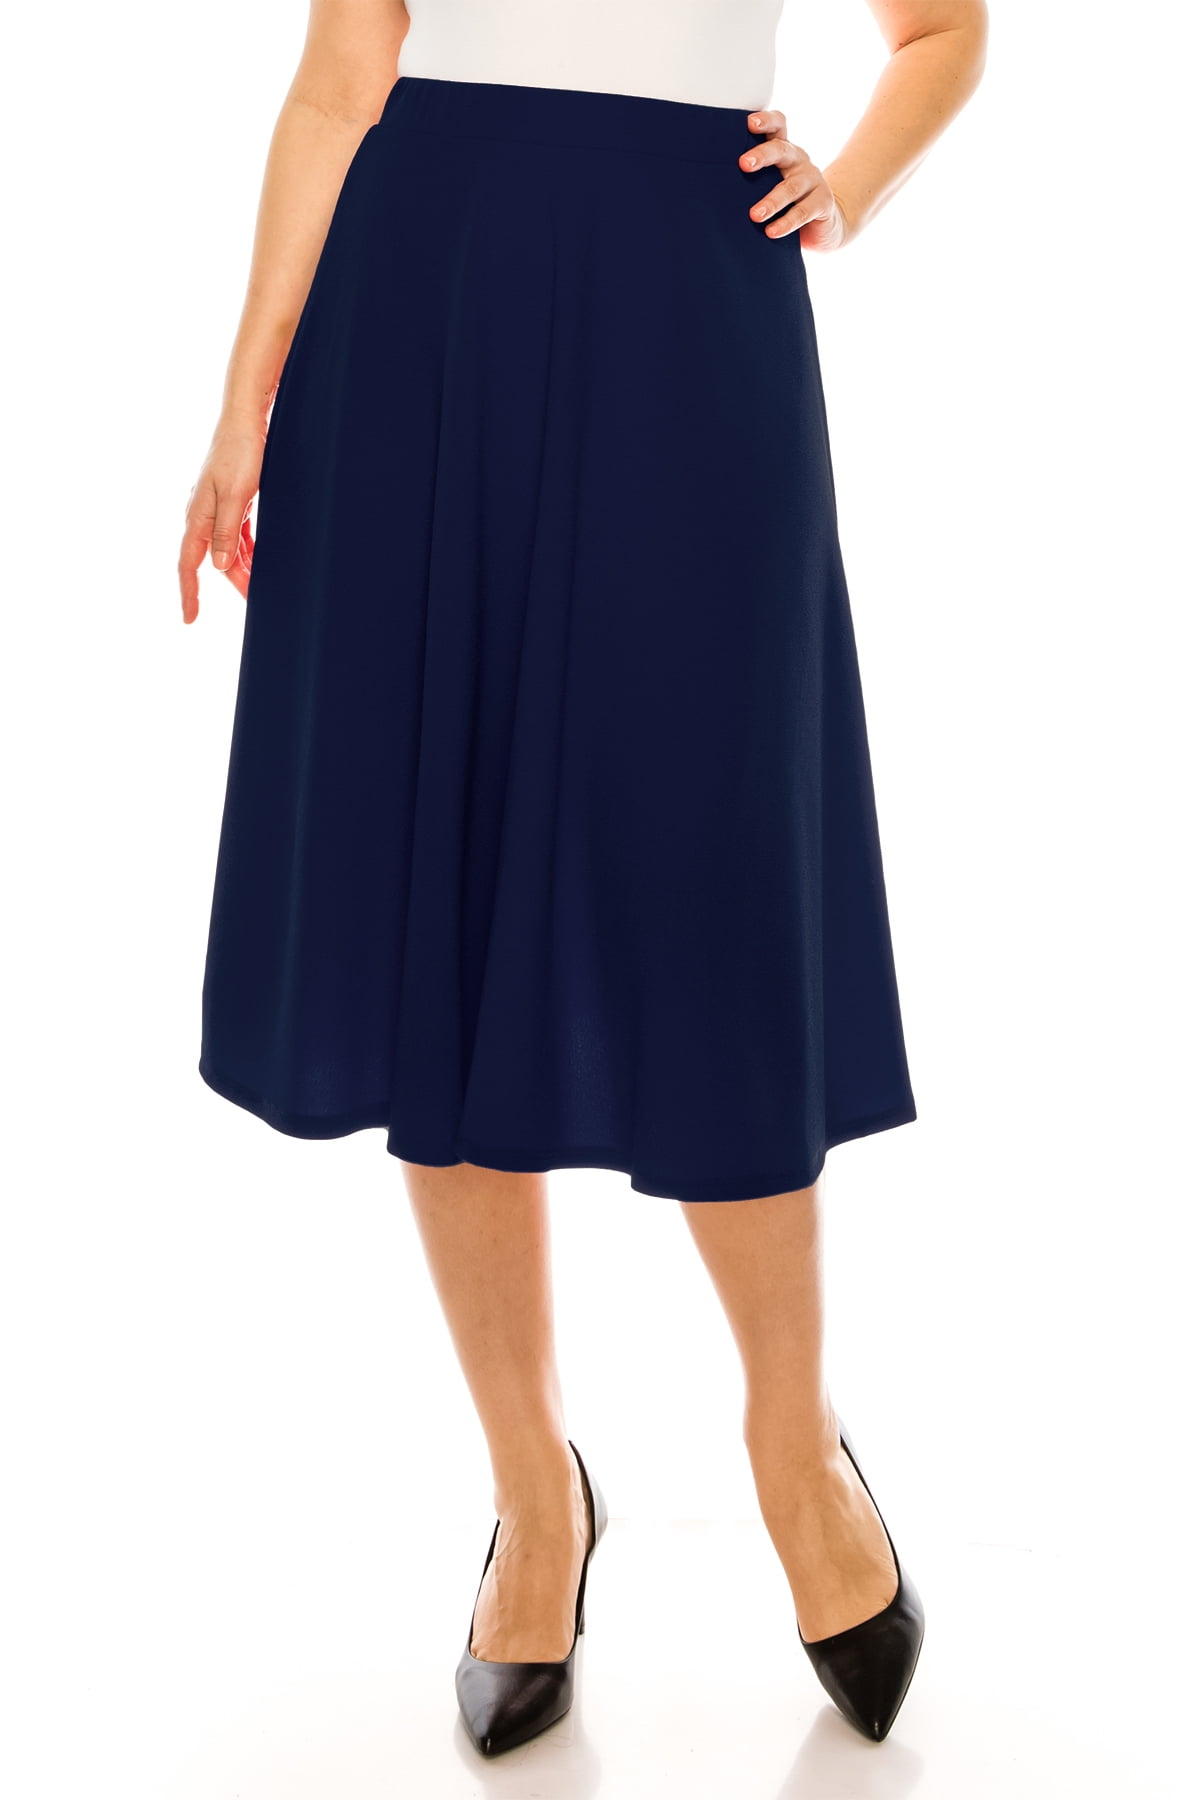 Women's Plus Size A-Line Casual Flared Elastic Band Midi Skirt ...